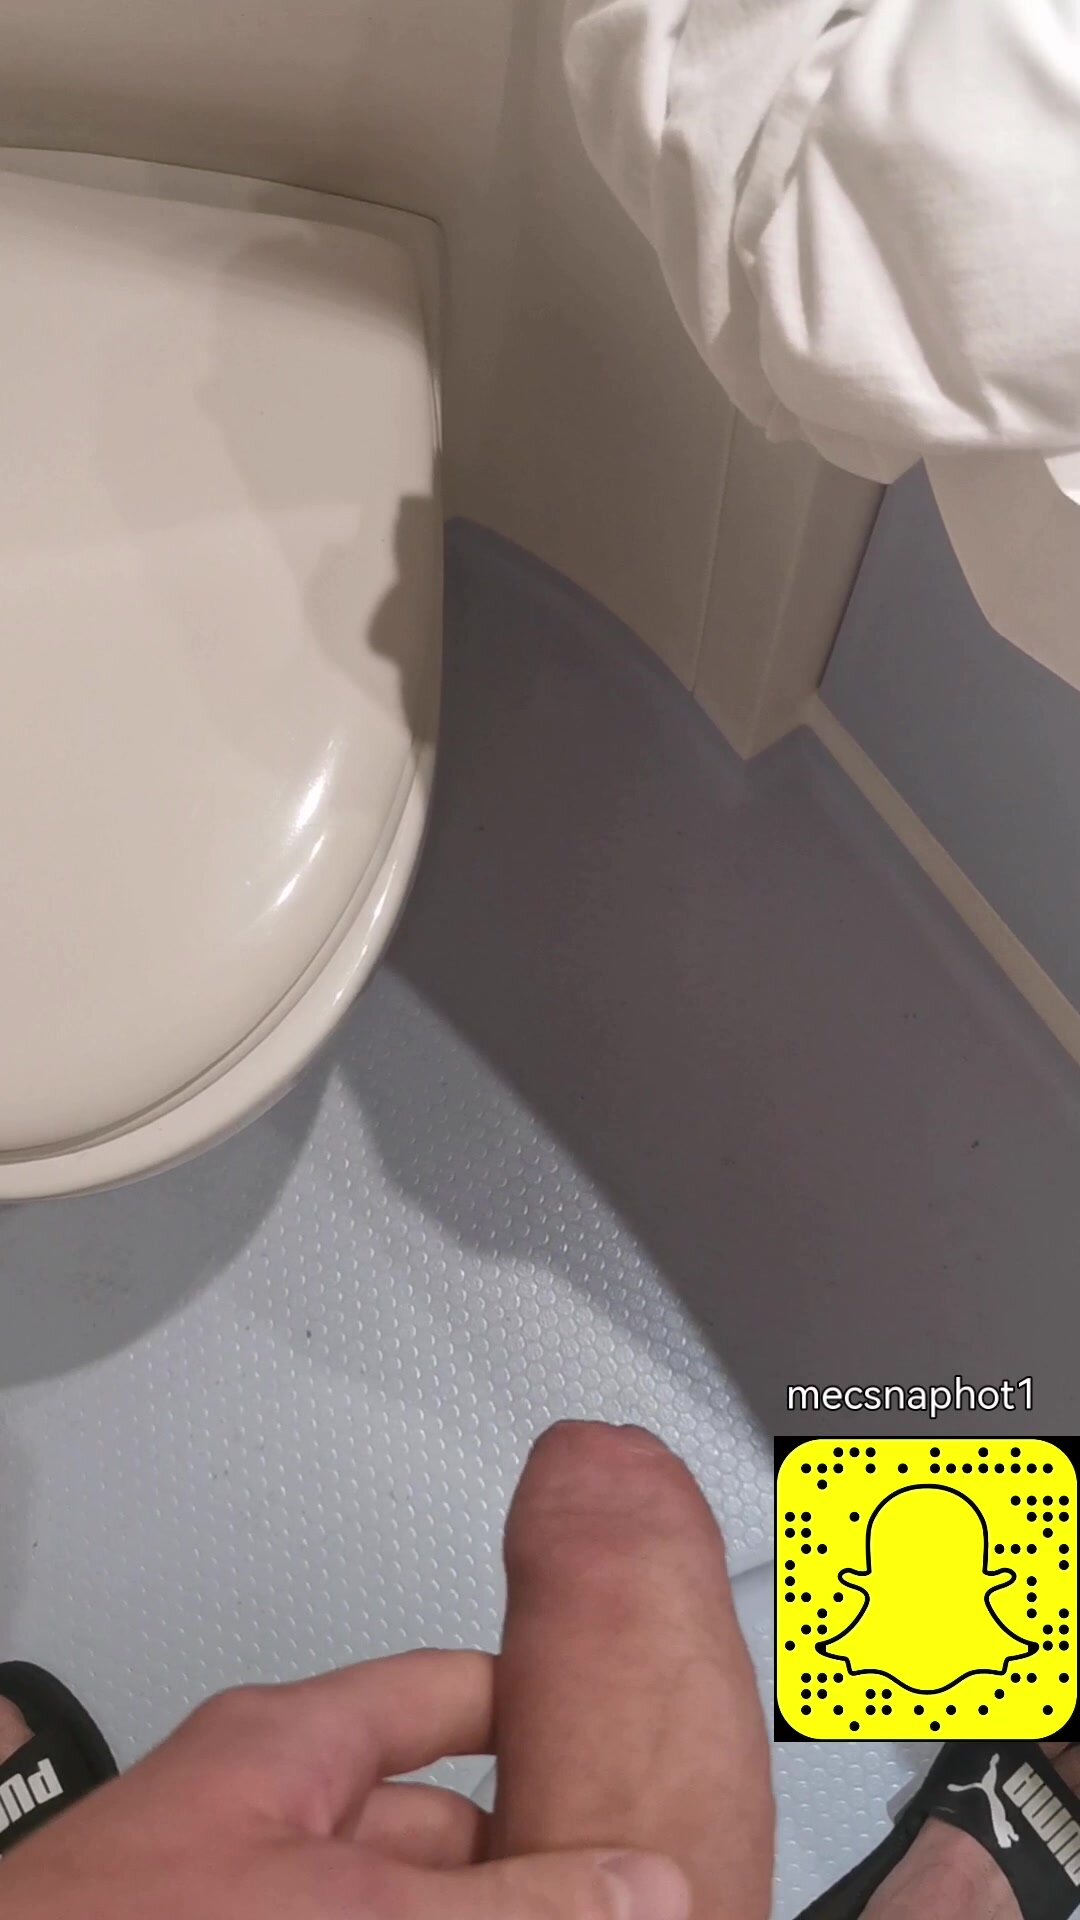 Completely naked, piss mess in public toilet